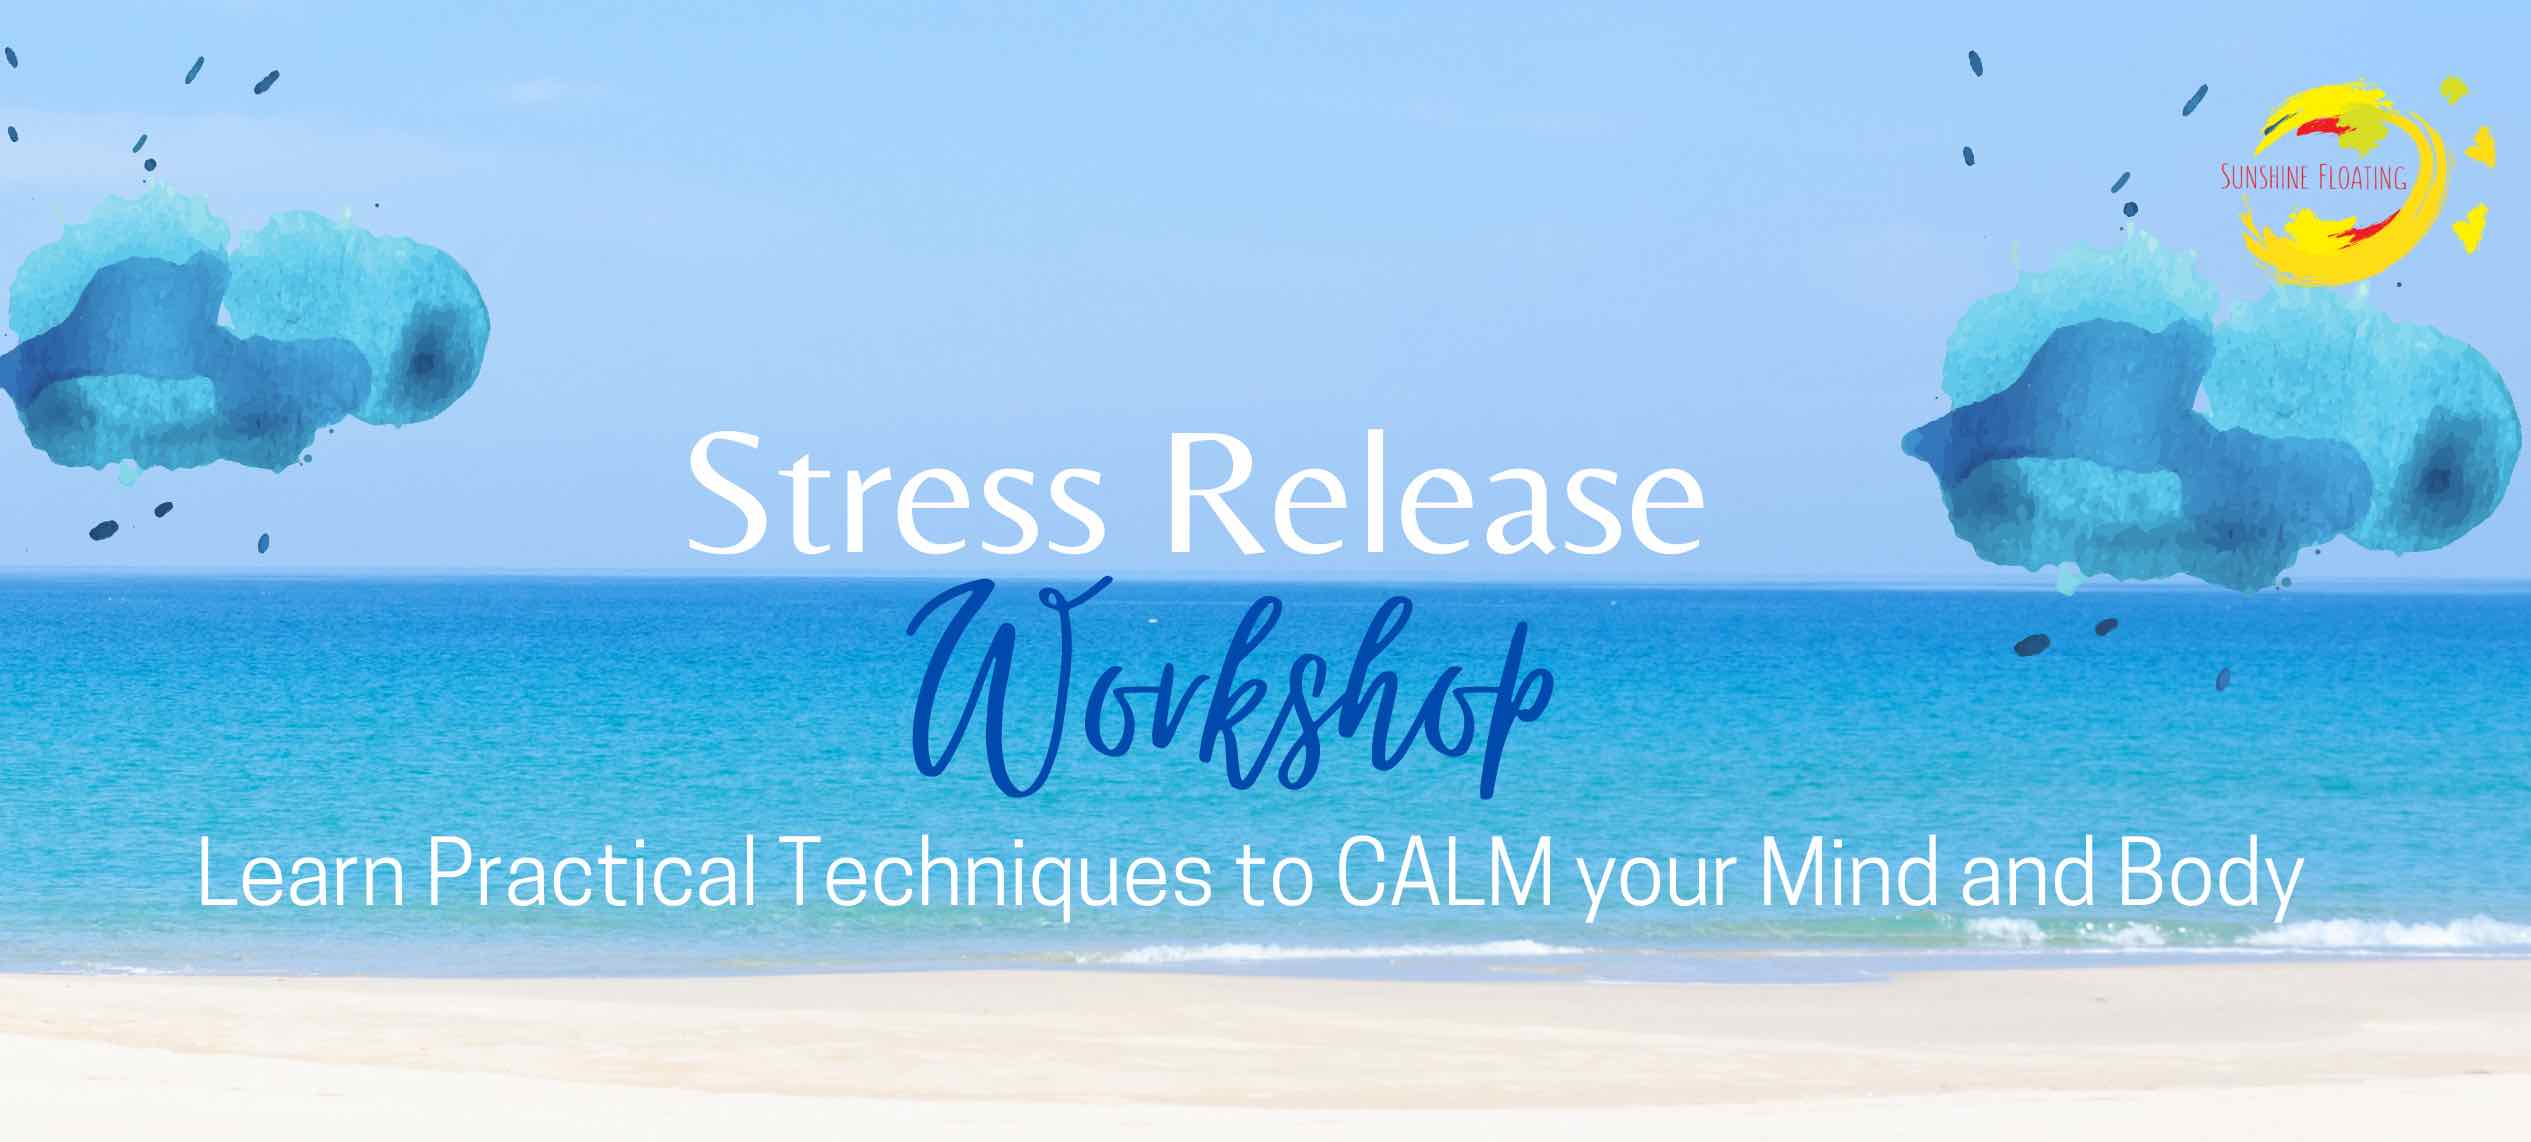 stress-release-free-wellbeing-resources-sunshinefloating1